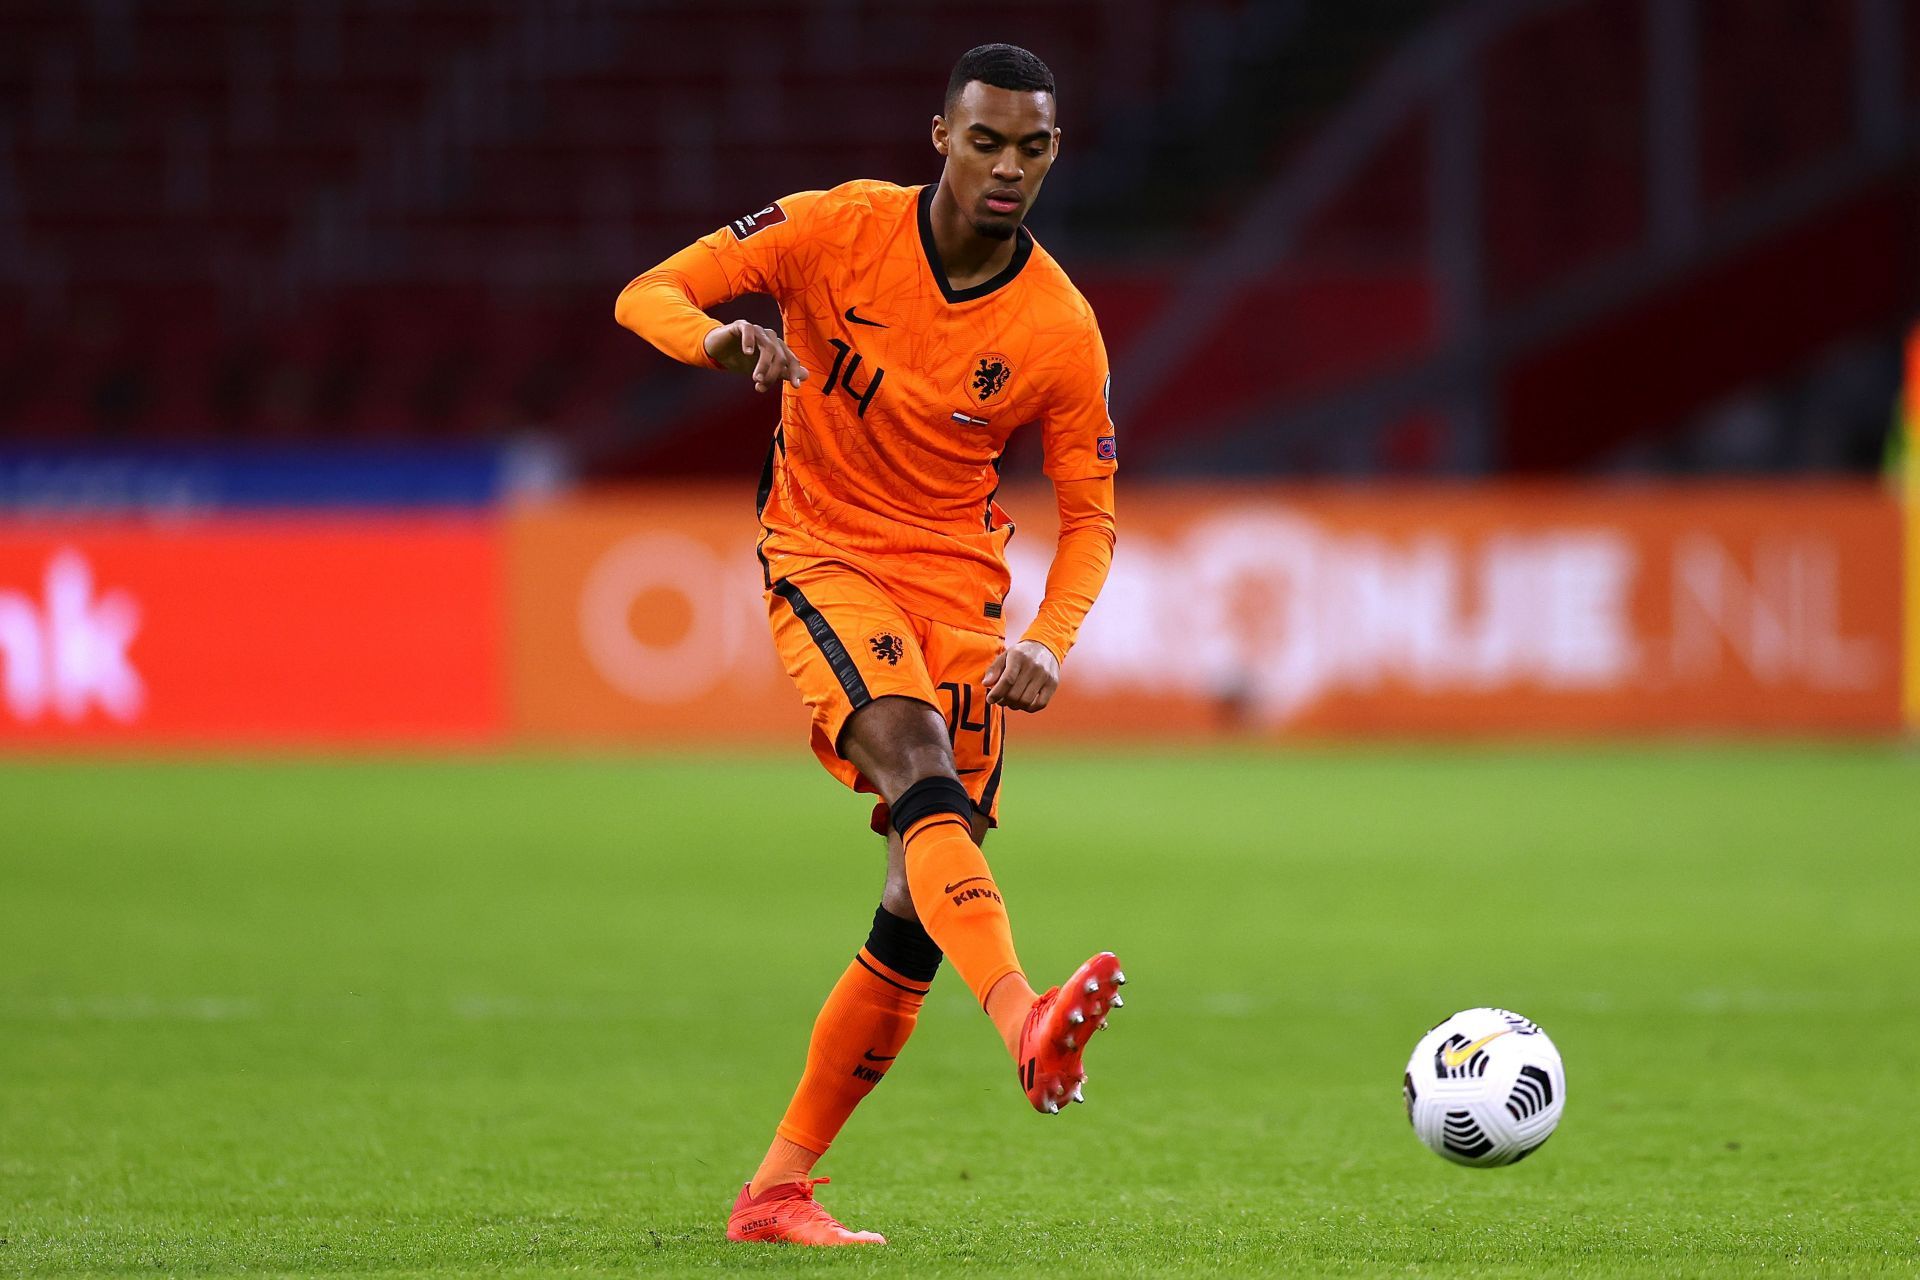 Ryan Gravenberch in action for the Netherlands during a FIFA World Cup 2022 Qualifier against Latvia